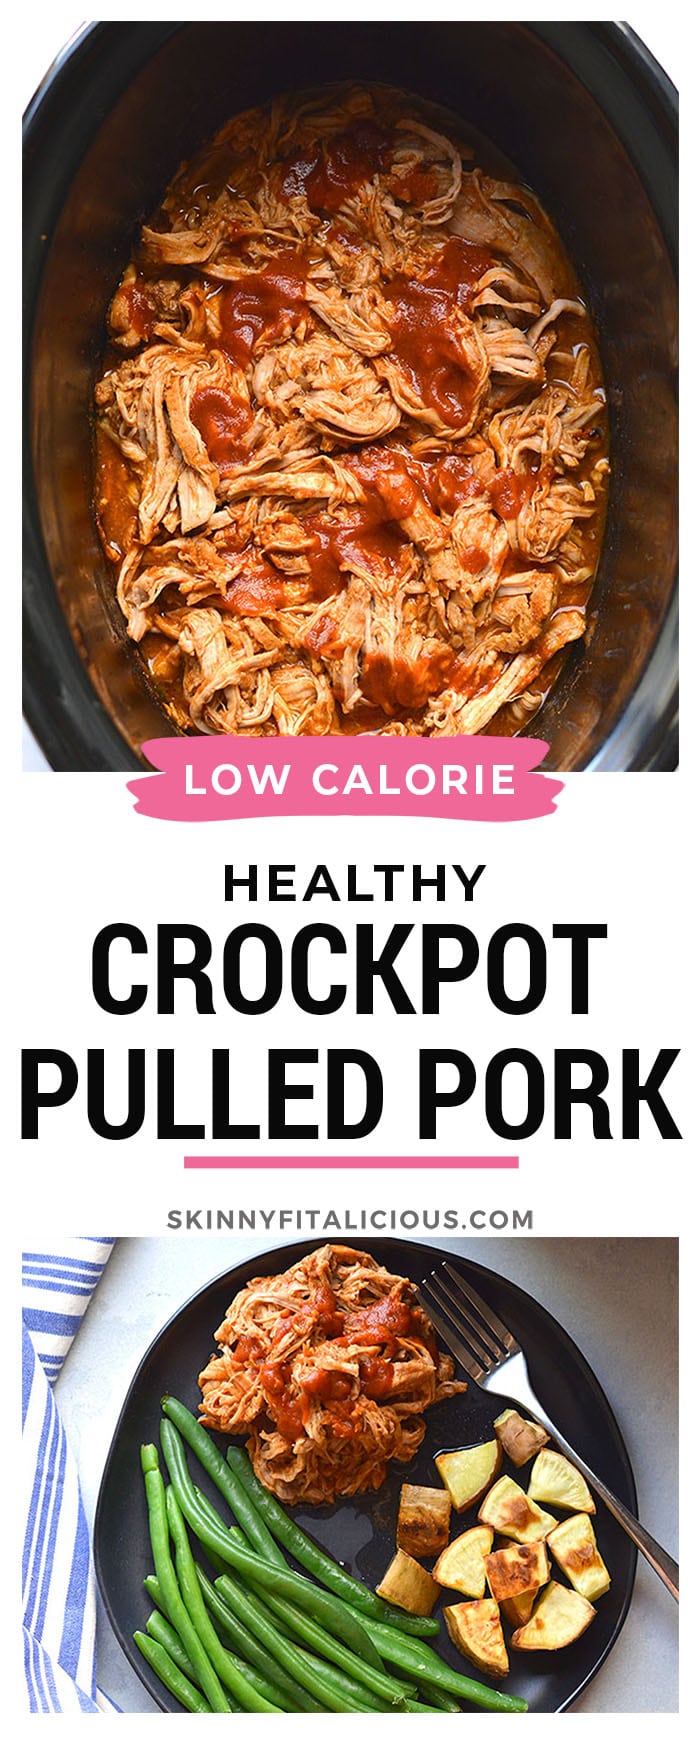 Healthy Crockpot Pulled Pork is a low calorie, low carb recipe. Perfect for easy meals and meal prep. Serve over a salad, in lettuce wraps, in grain free buns, over cauliflower rice or brown rice. A simple, slow cooker meal that takes little effort and tastes delicious! 